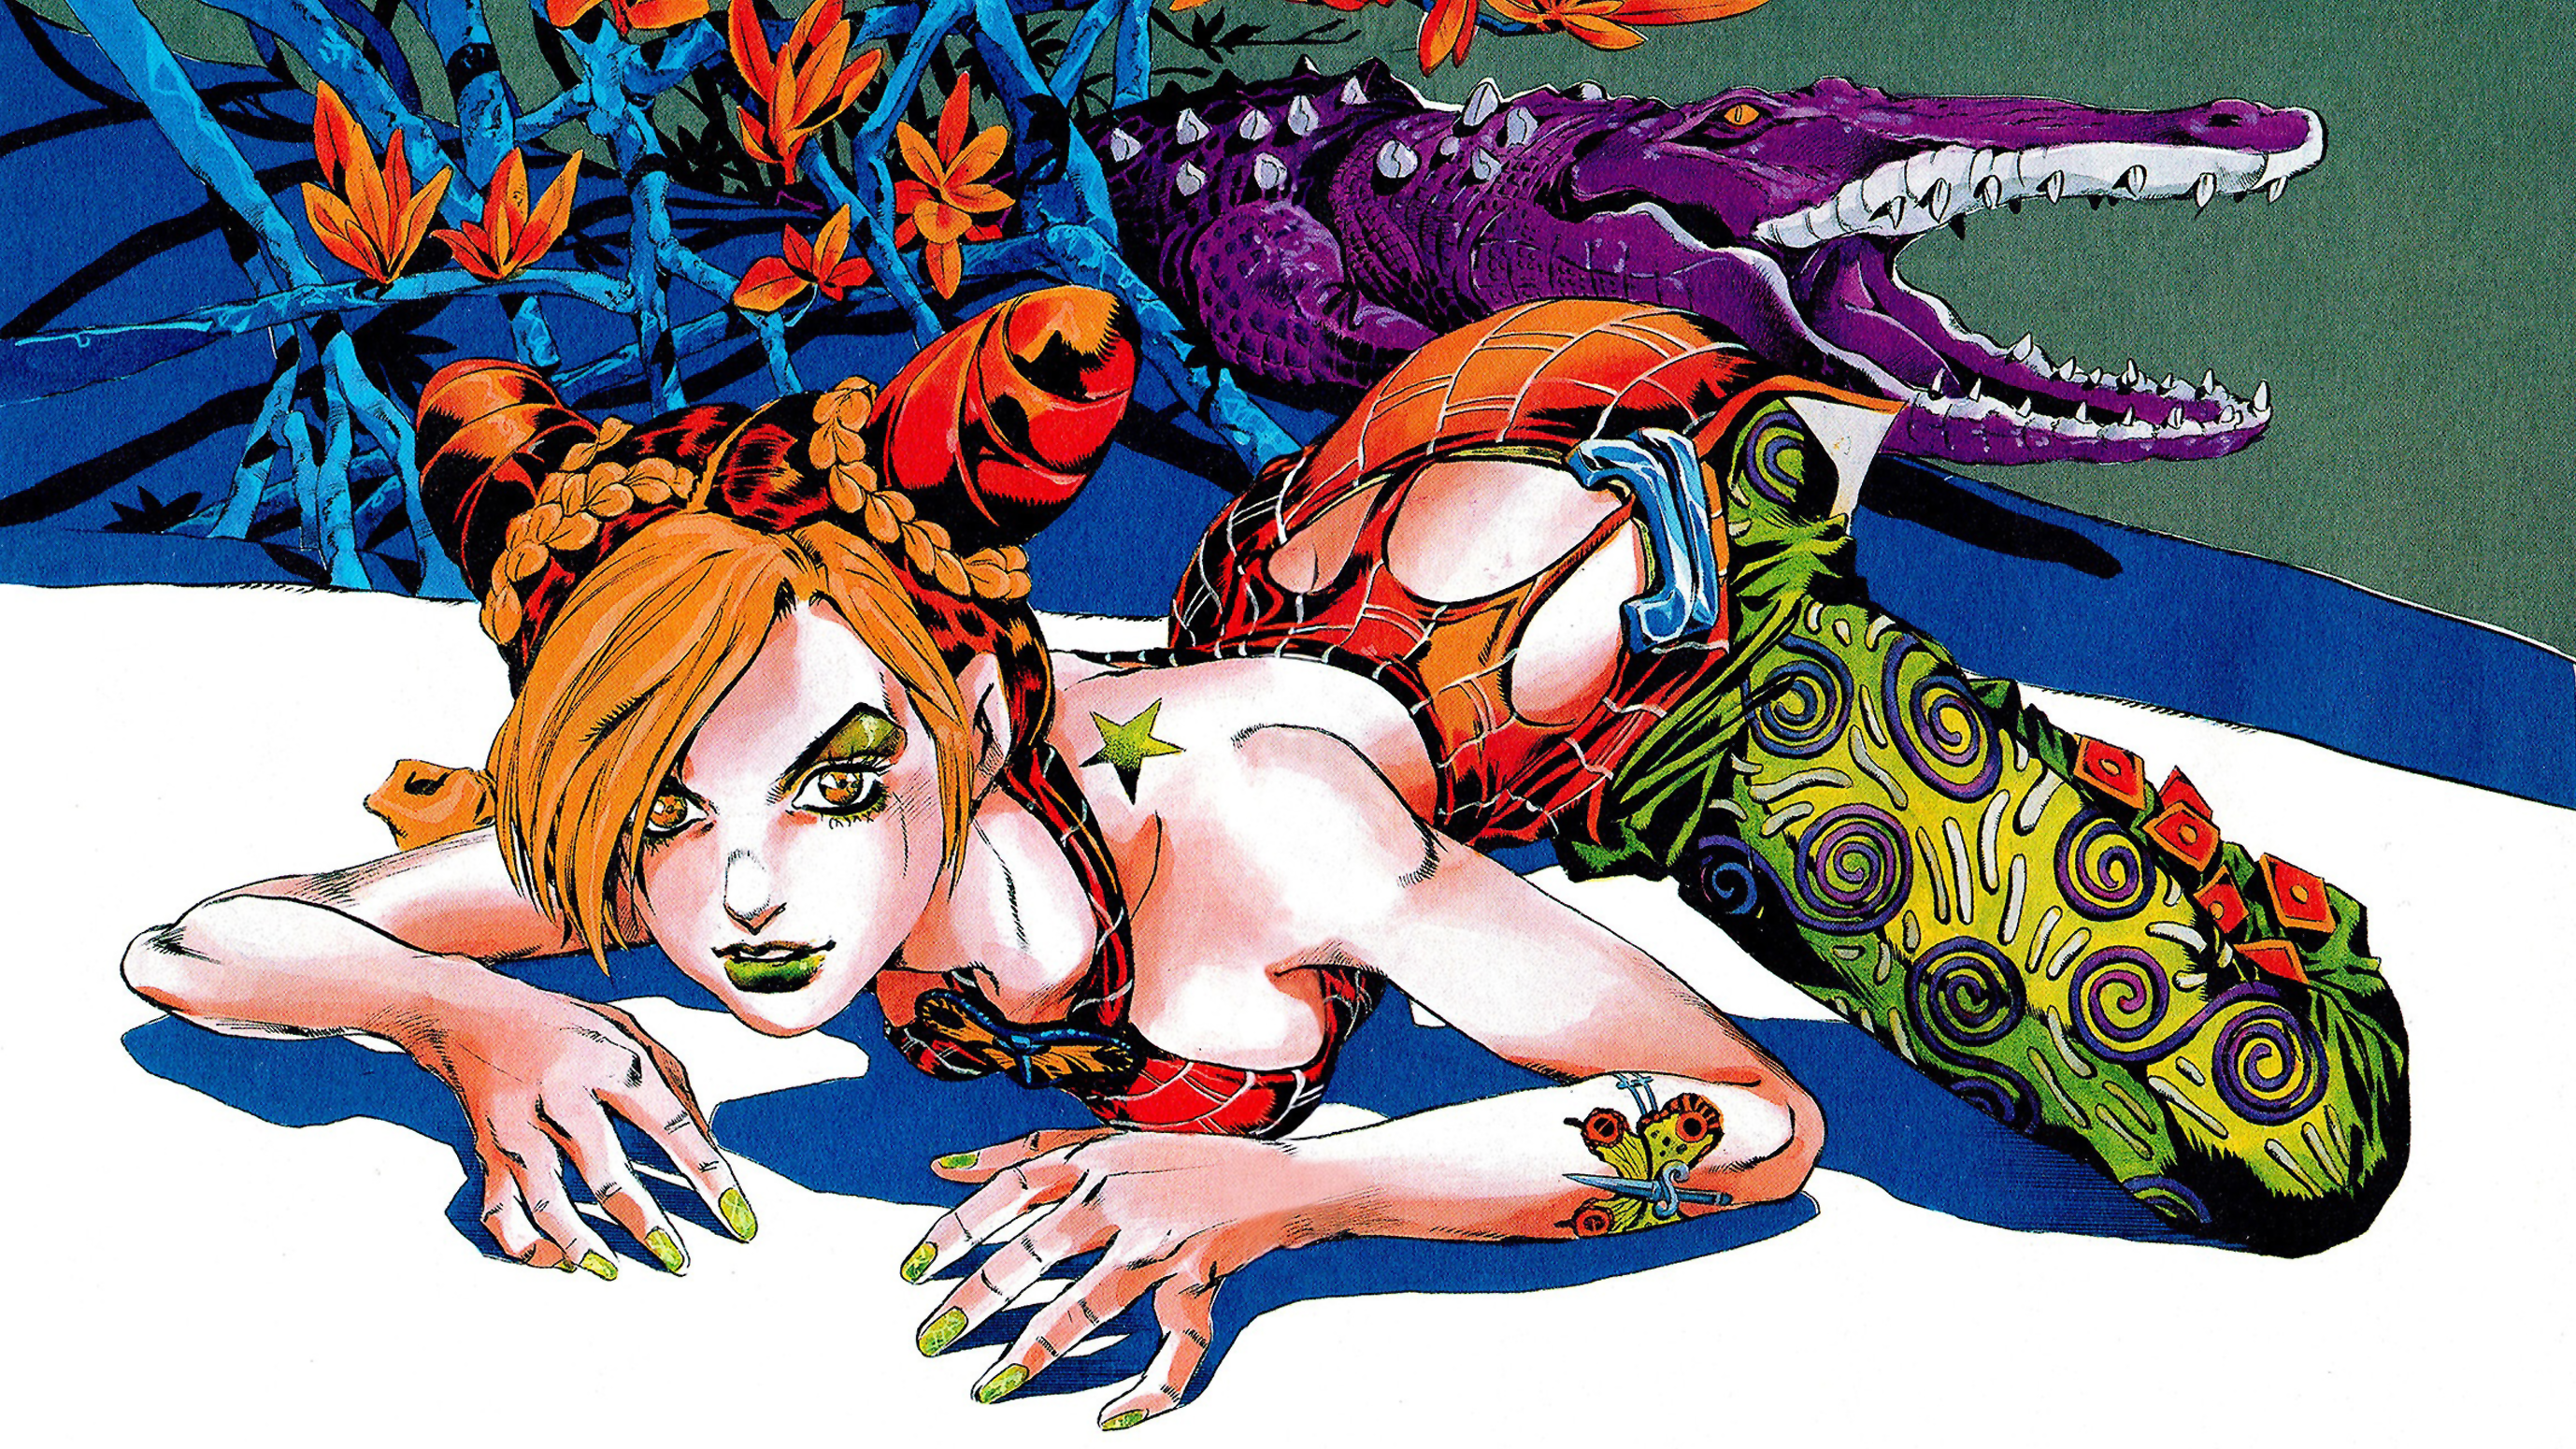 Jojos Bizarre Adventure Stone Ocean wallpapers for desktop download free  Jojos Bizarre Adventure Stone Ocean pictures and backgrounds for PC   moborg